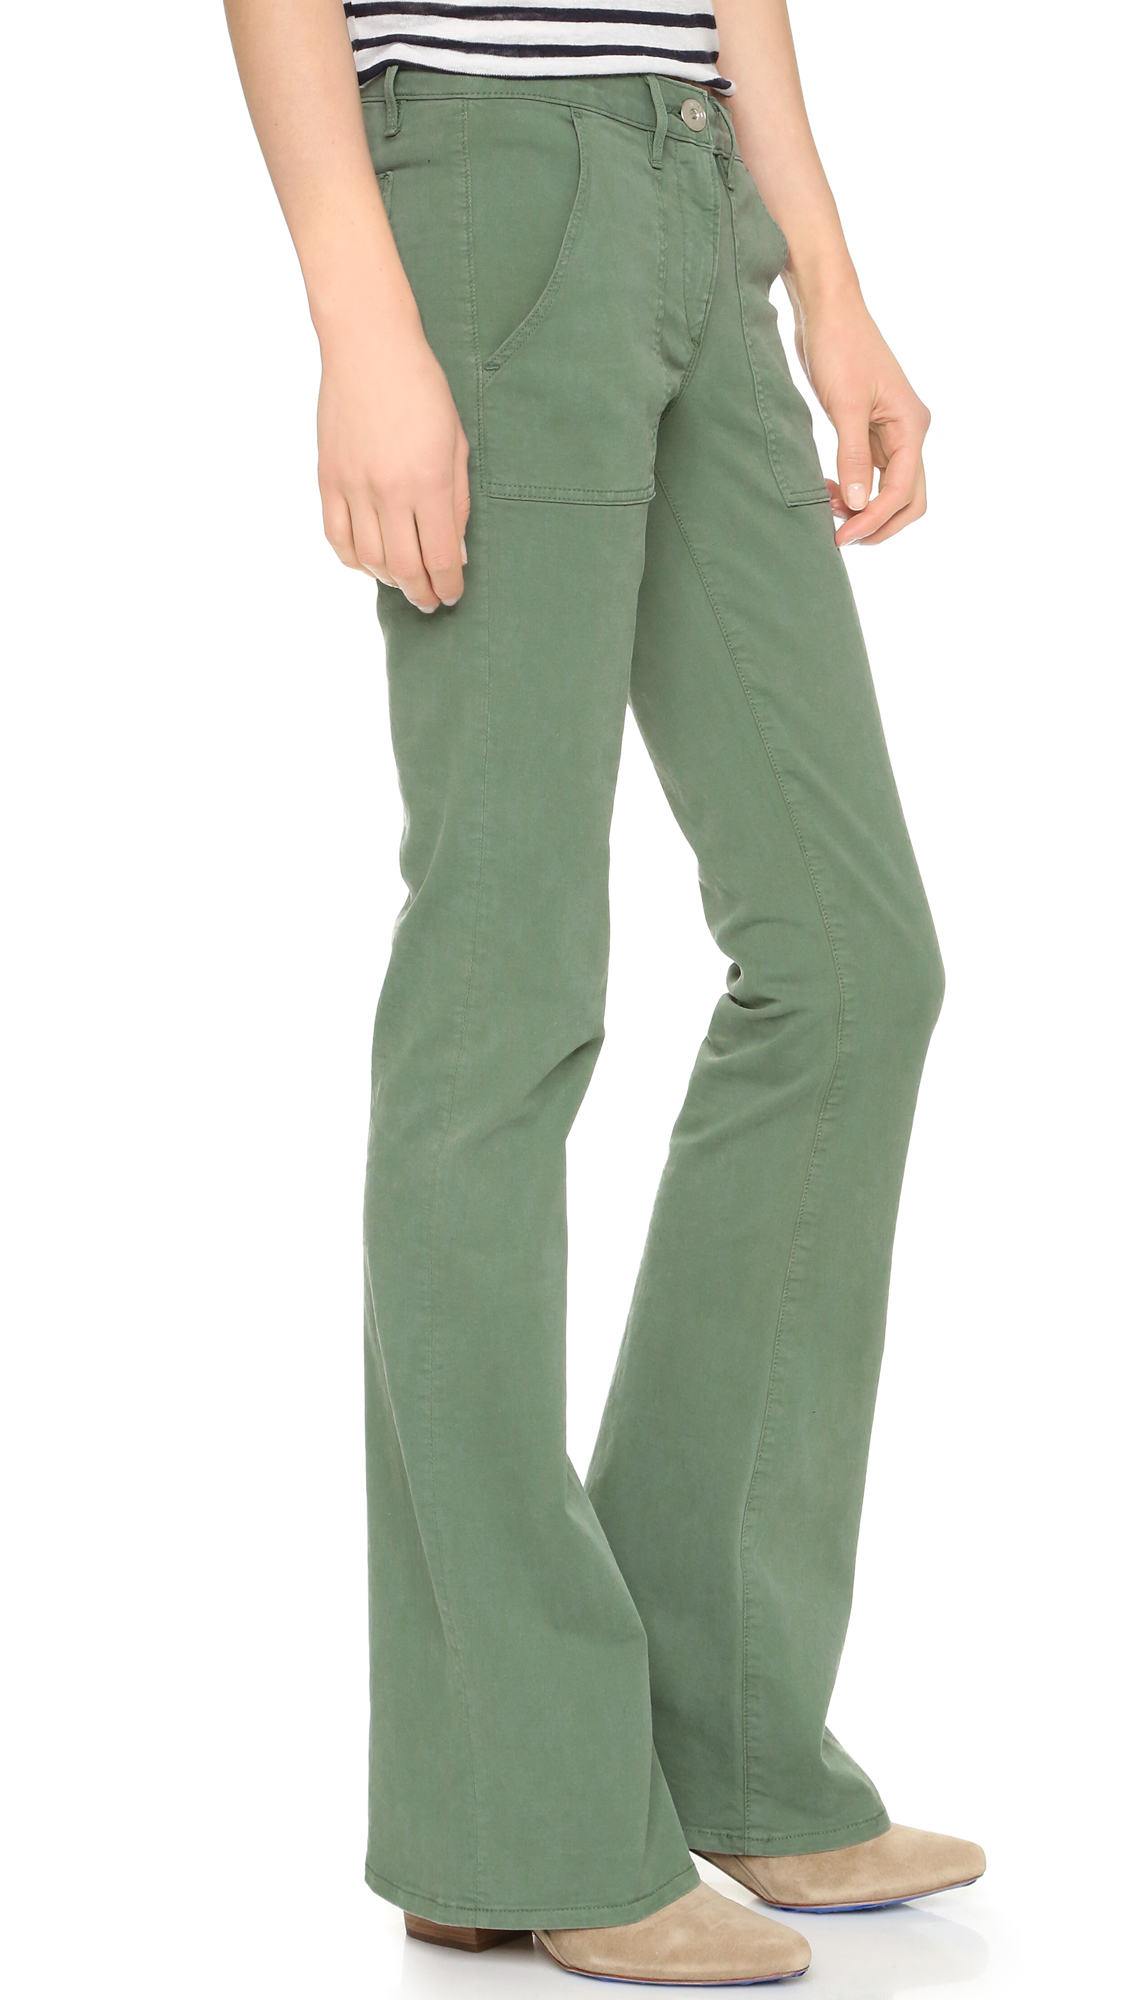 Lyst - 3X1 W2 Military Flare Pants in Green